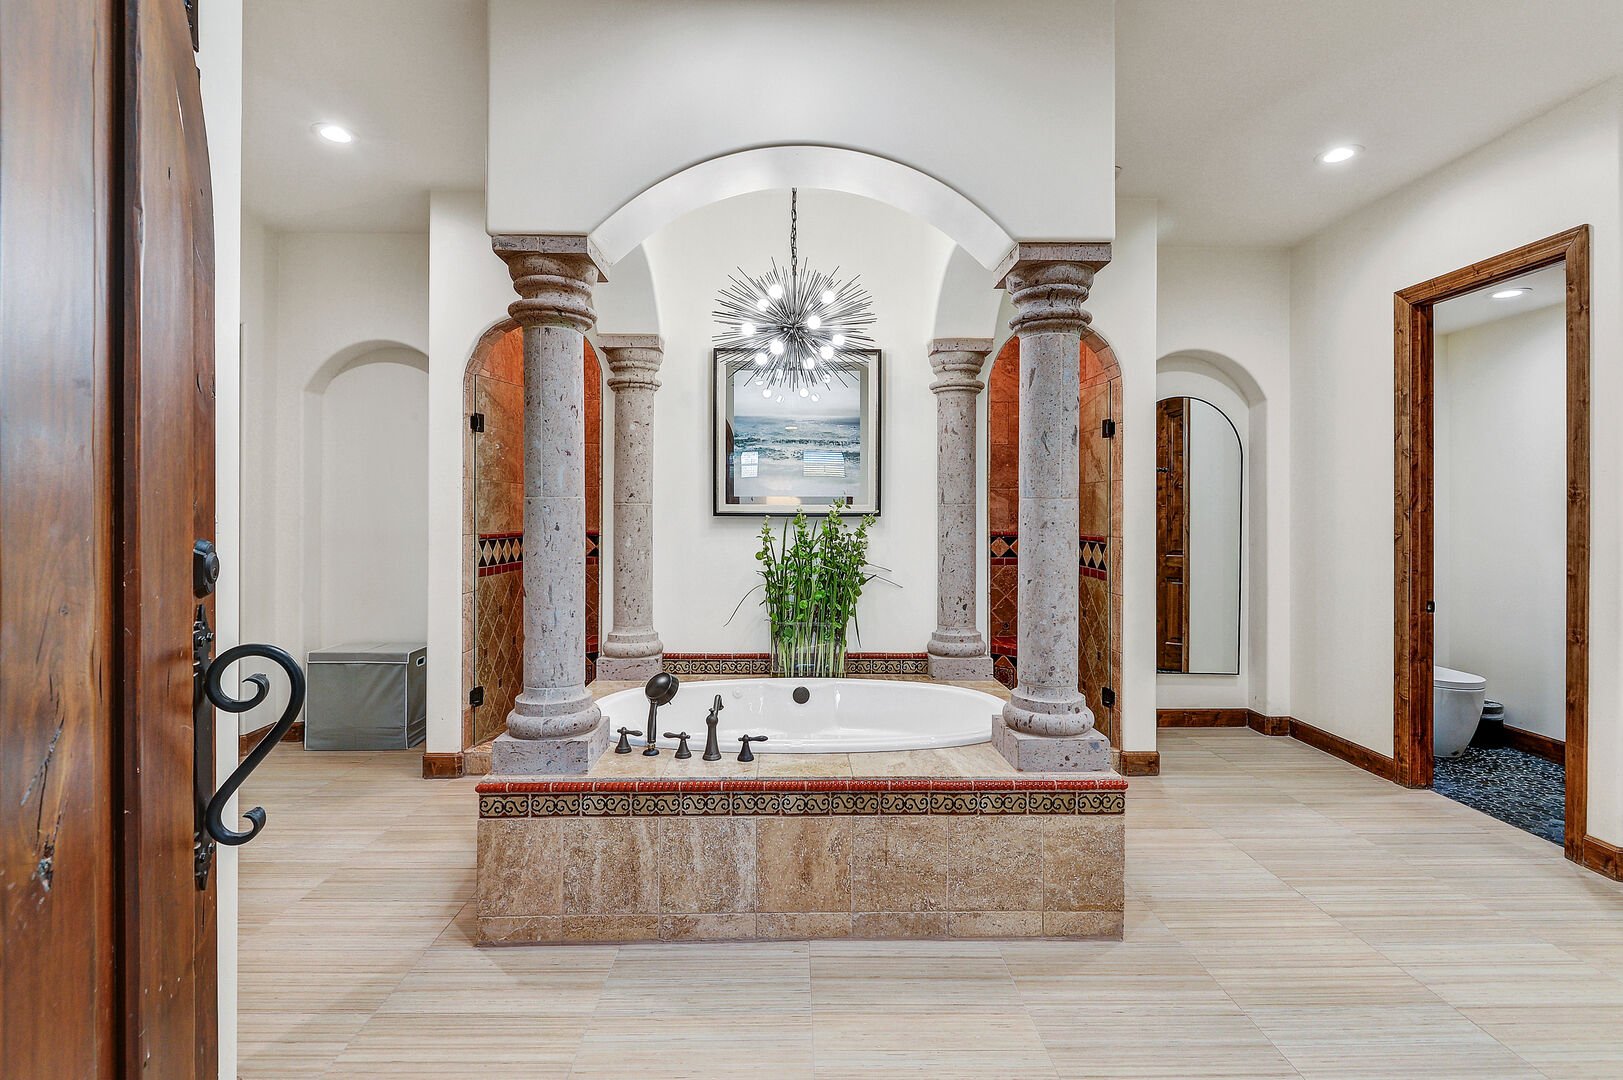 Featuring high-end fixtures, lavish amenities, and a design that exudes elegance, this private sanctuary ensures a luxurious and tranquil bathing experience.